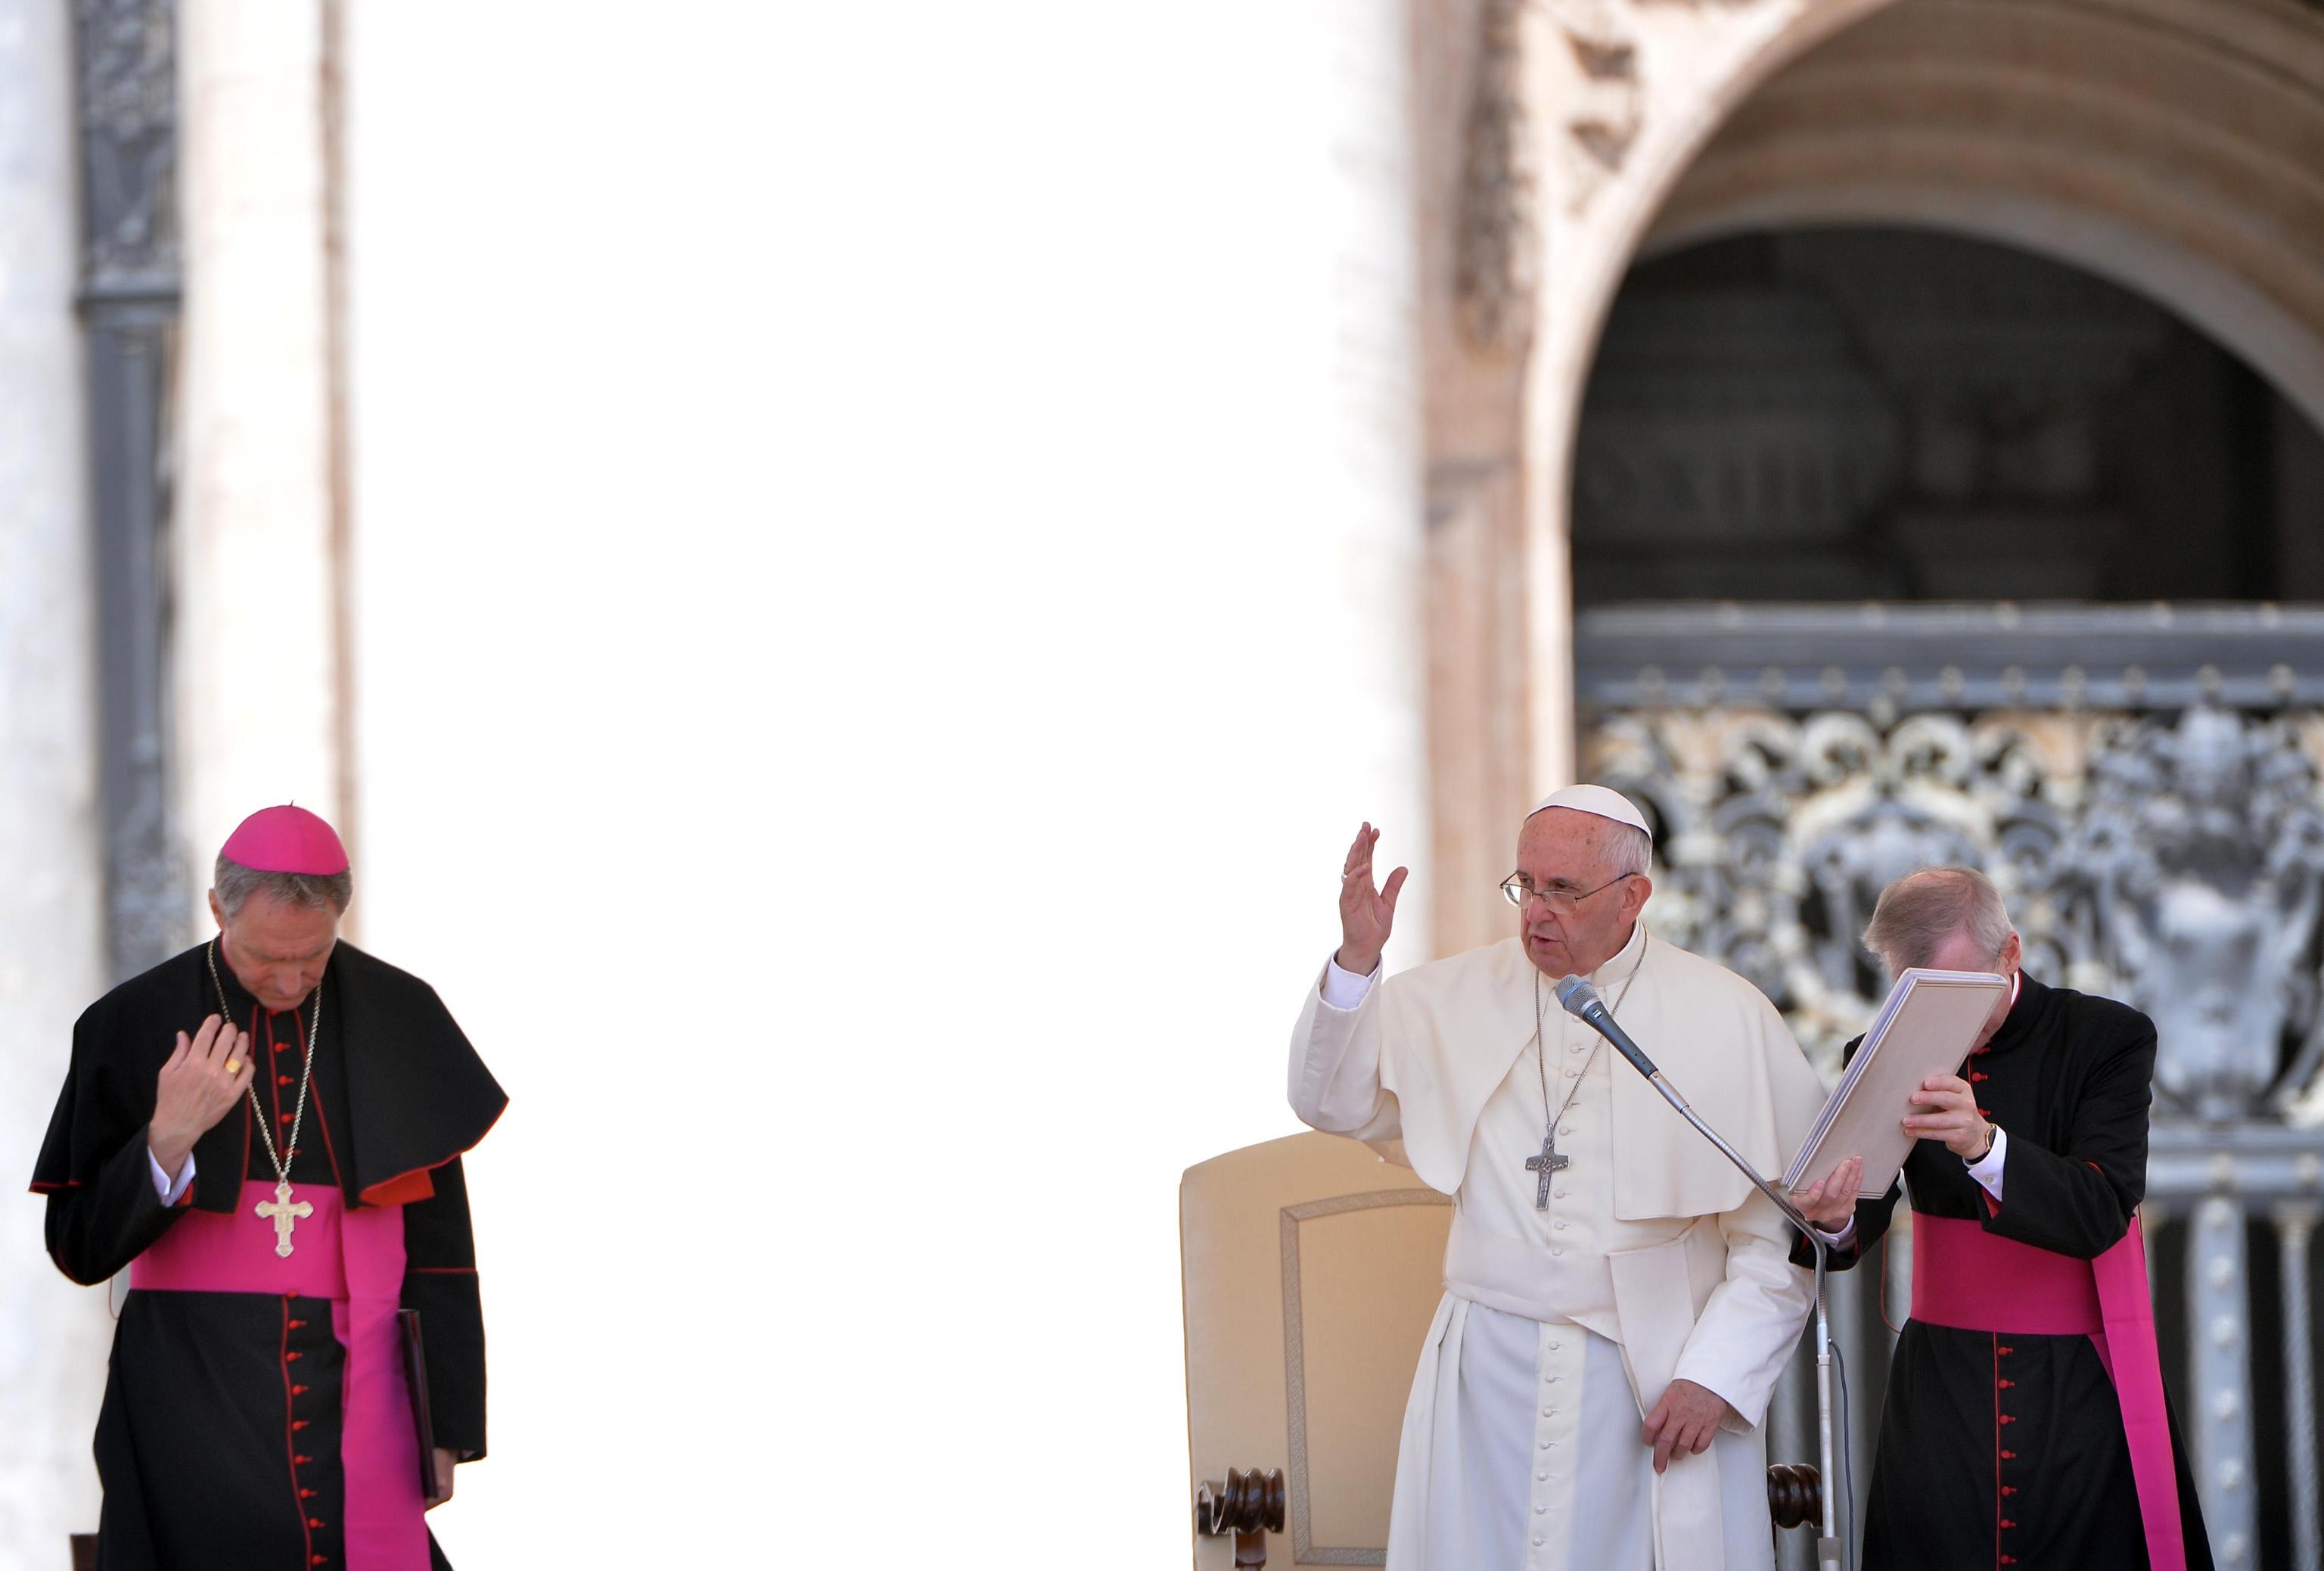 Pope Francis blesses the faithful during his weekly general audience